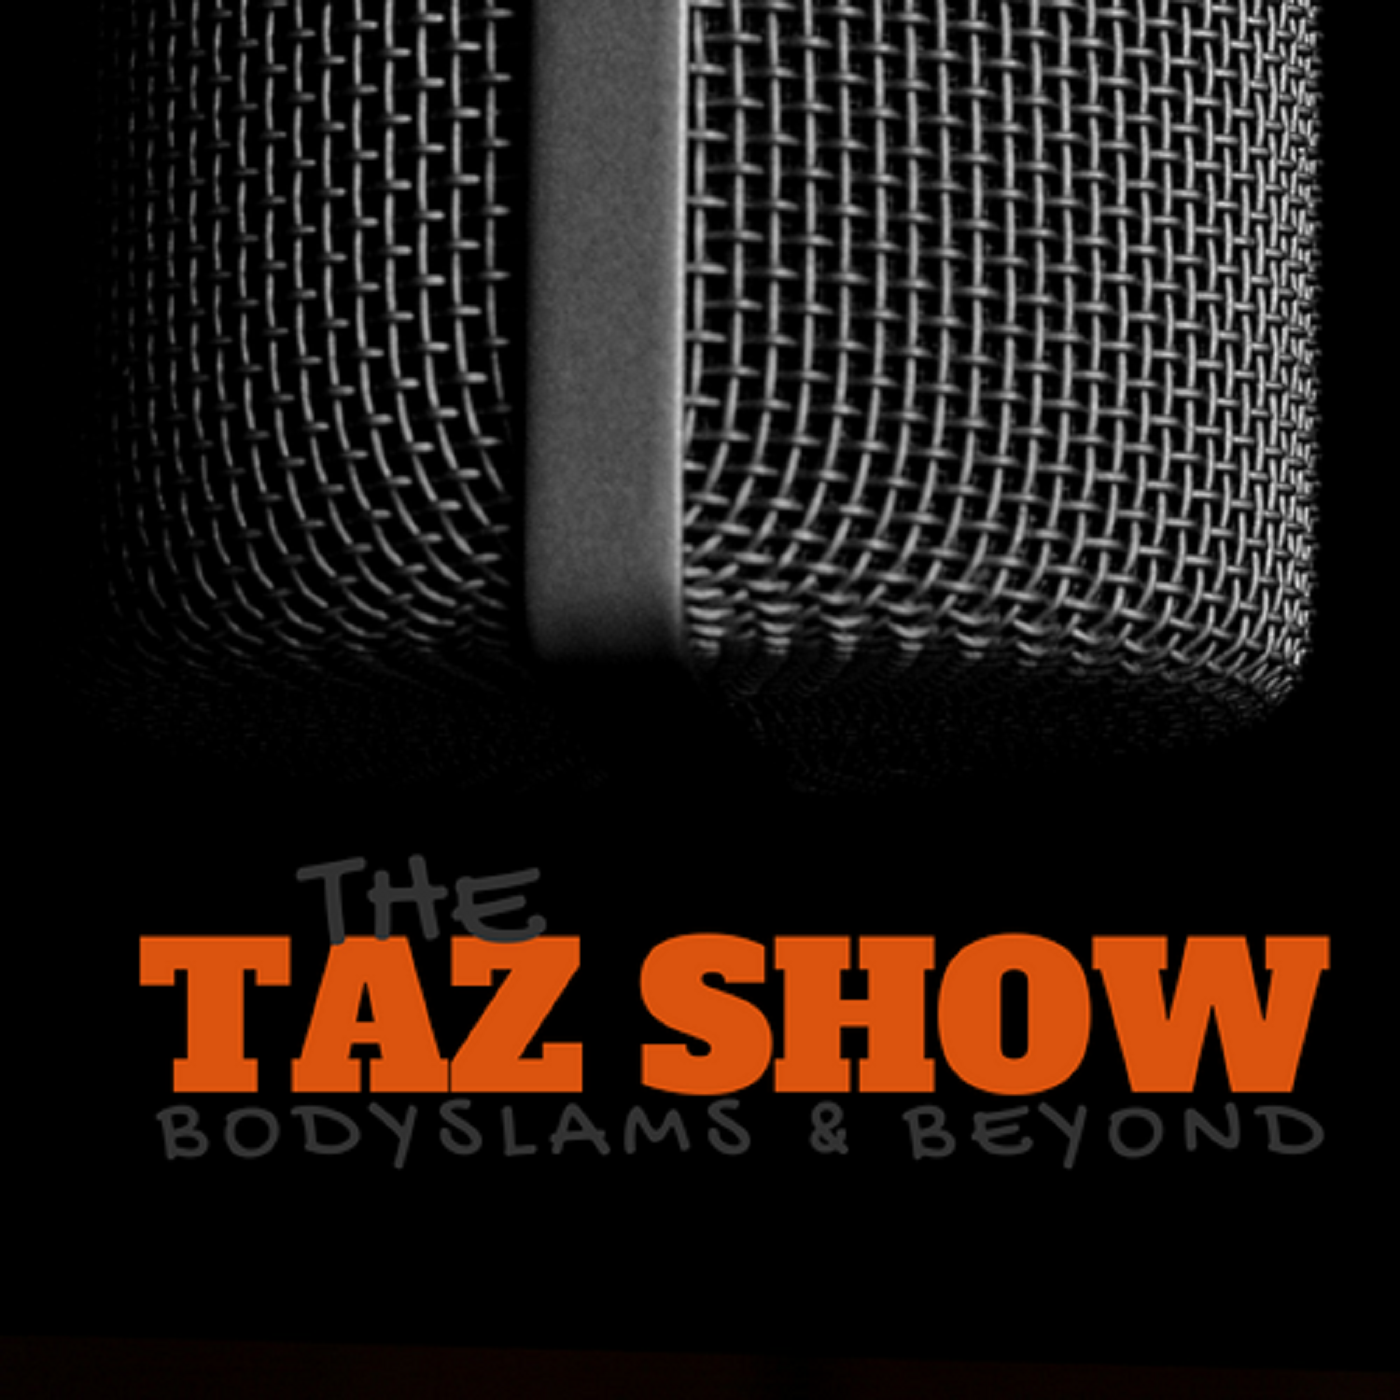 The Taz Show! Monday, October 5th, 2015